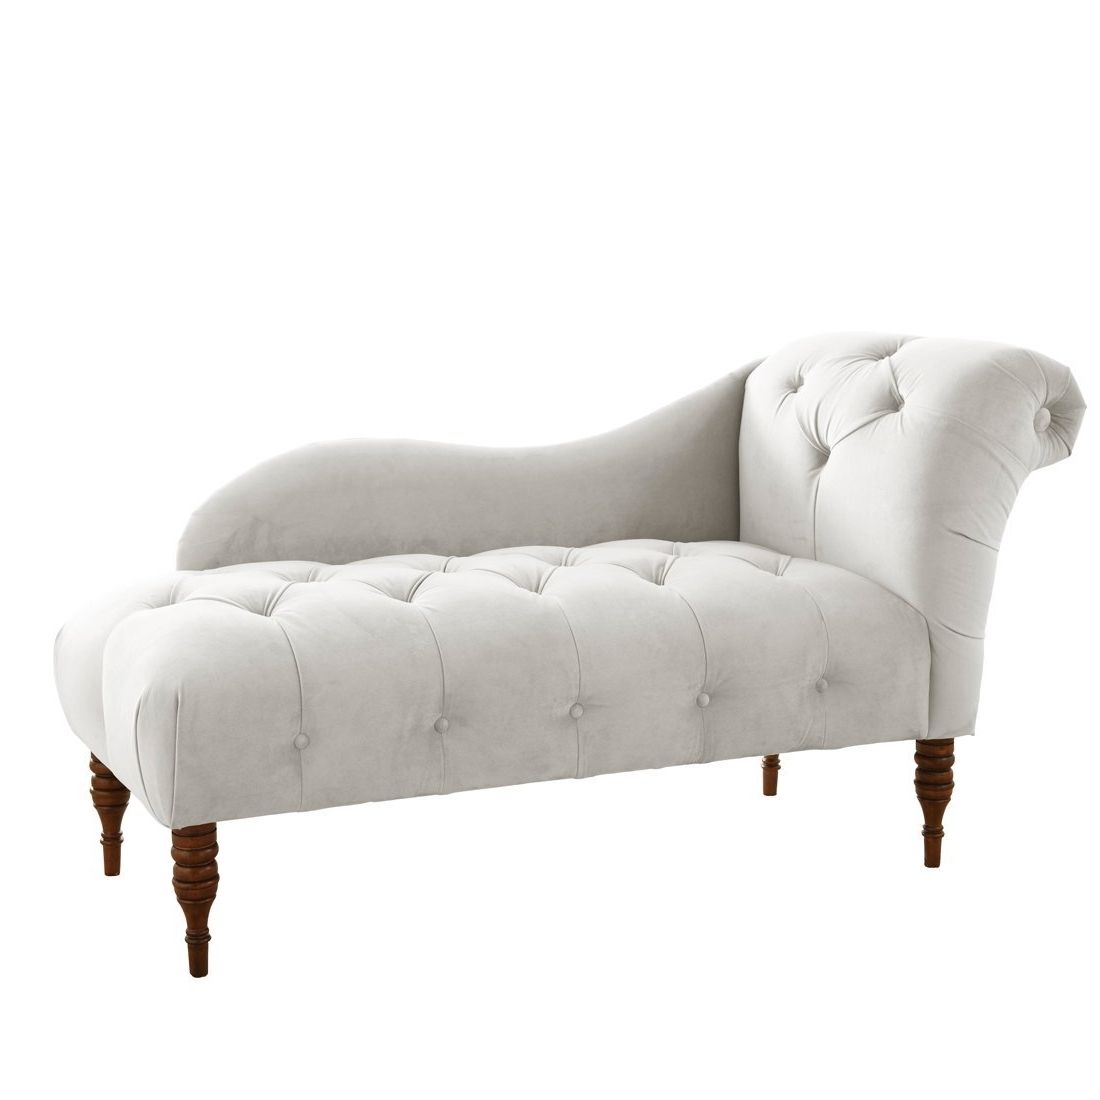 Amazon: Skyline Furniture Tufted Fainting Sofa, Velvet Light With Trendy Couches With Chaise Lounge (View 9 of 15)